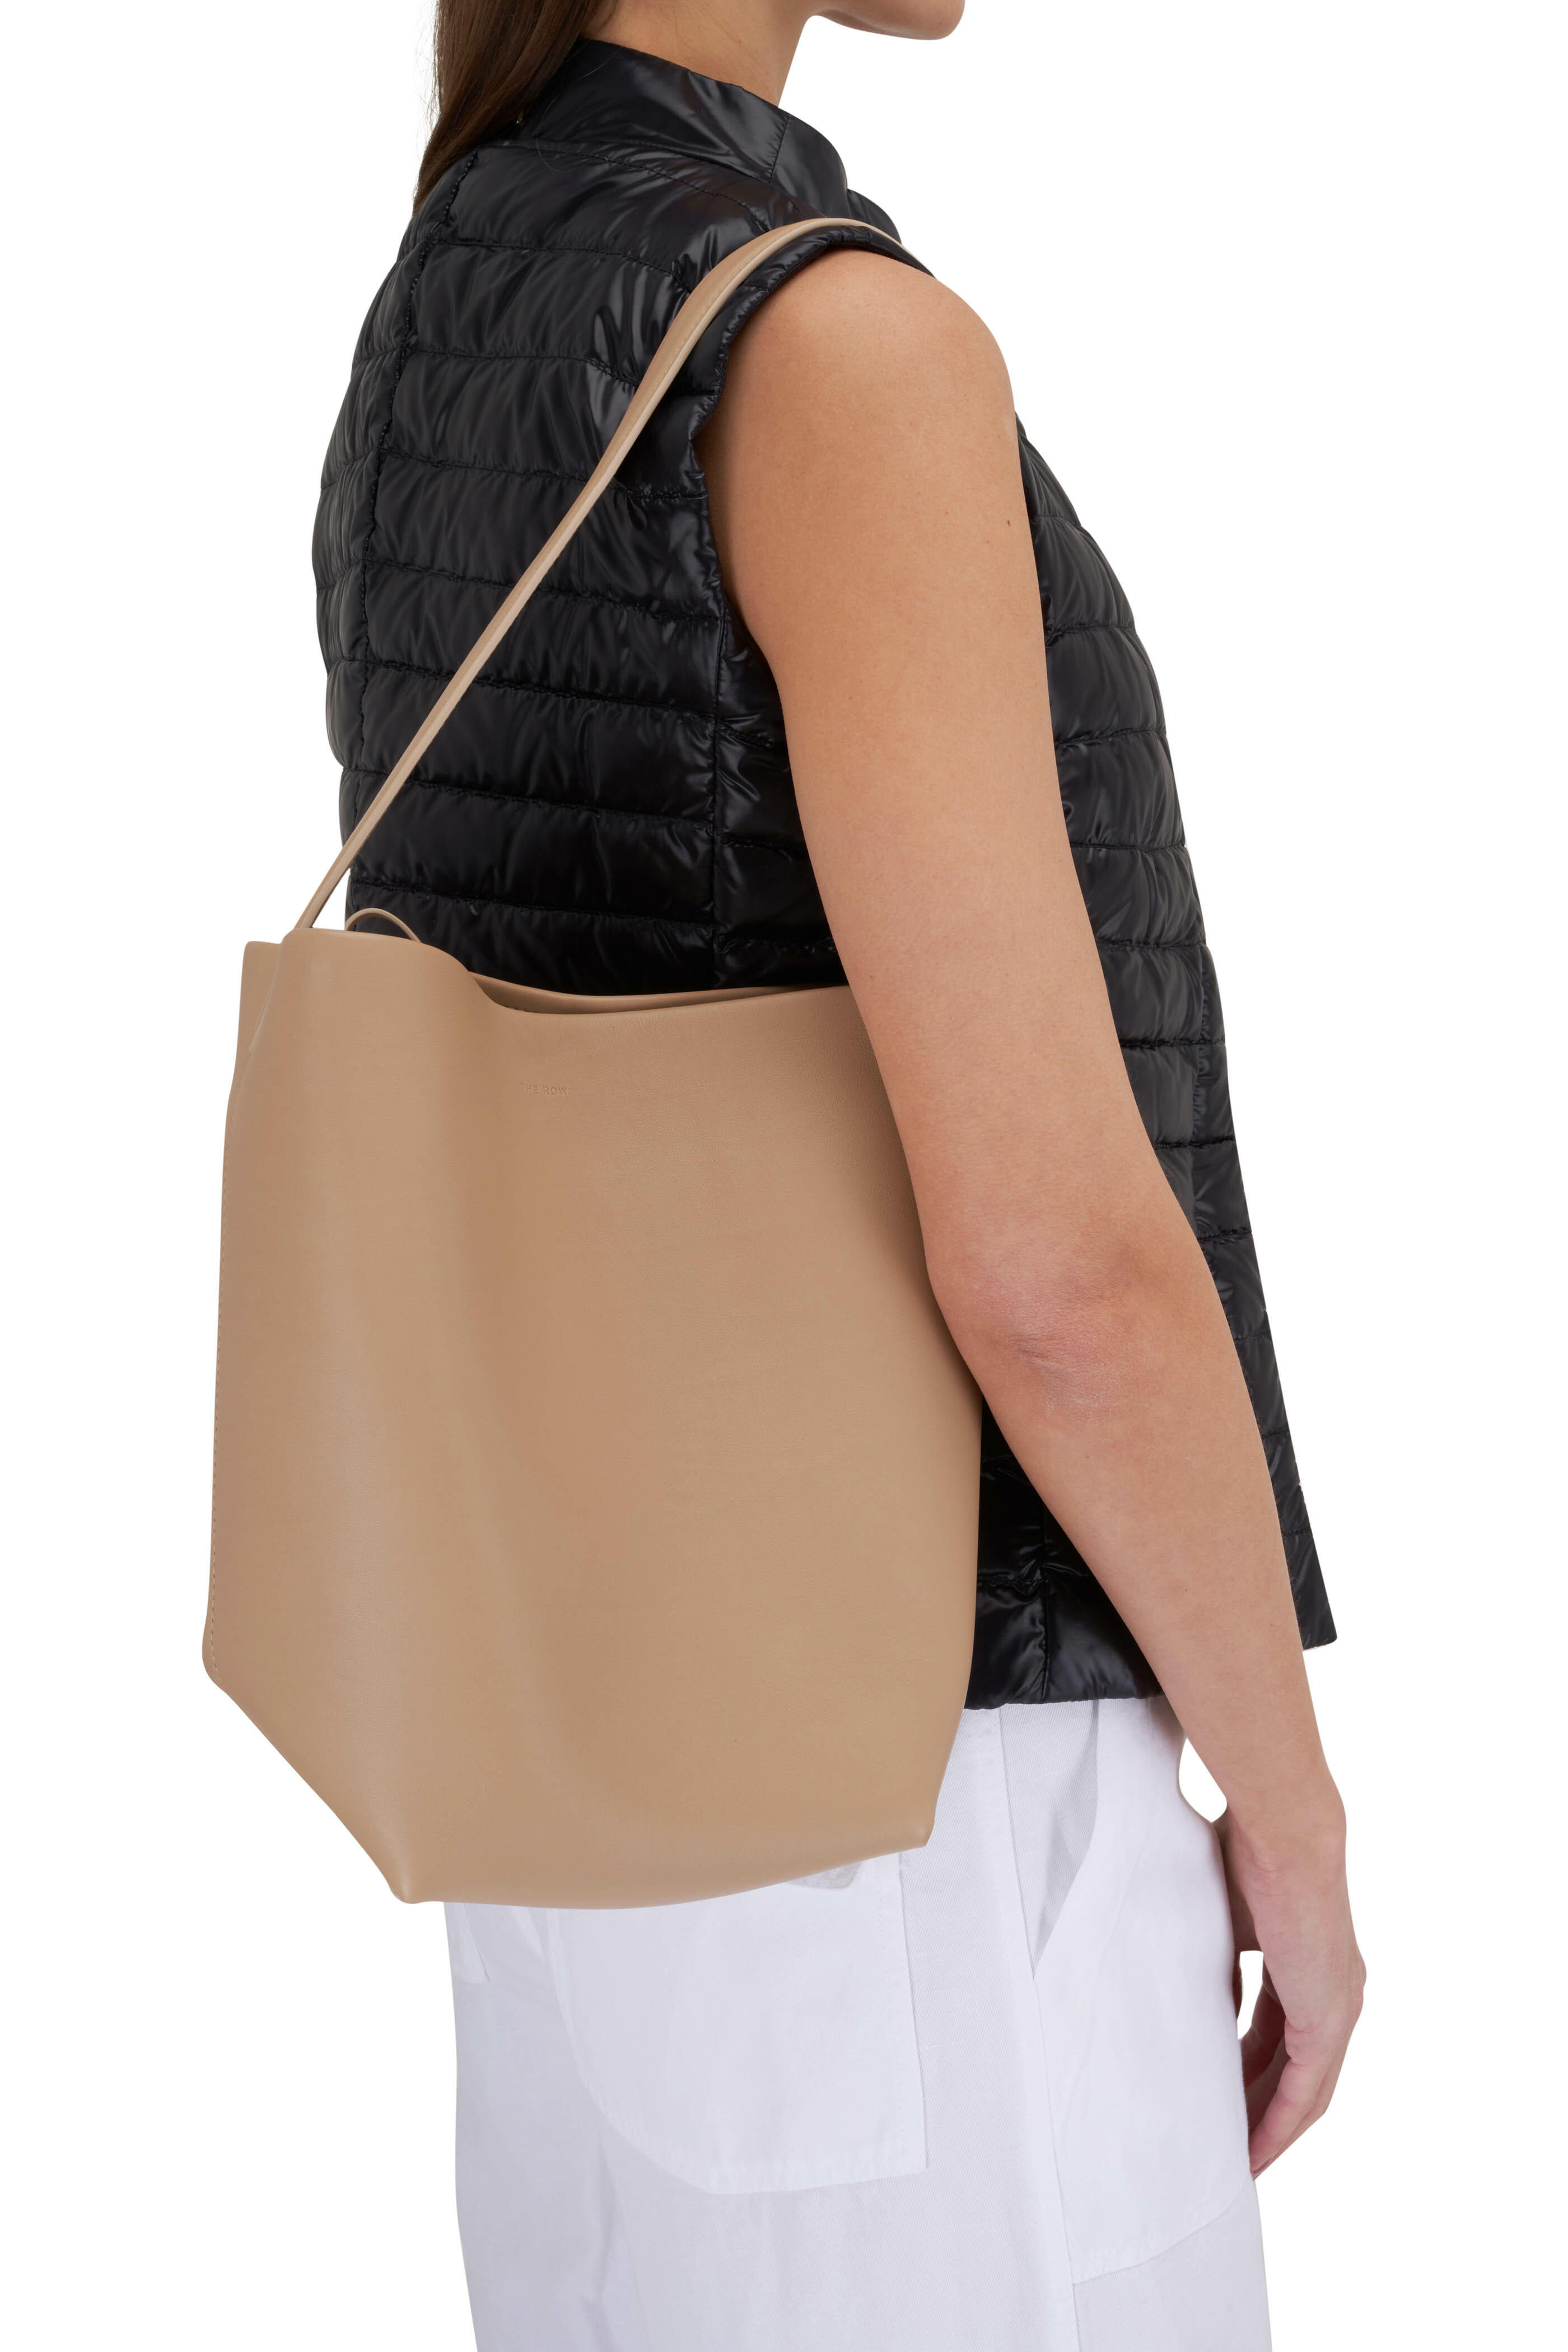 Park Small Leather Shoulder Bag in Beige - The Row